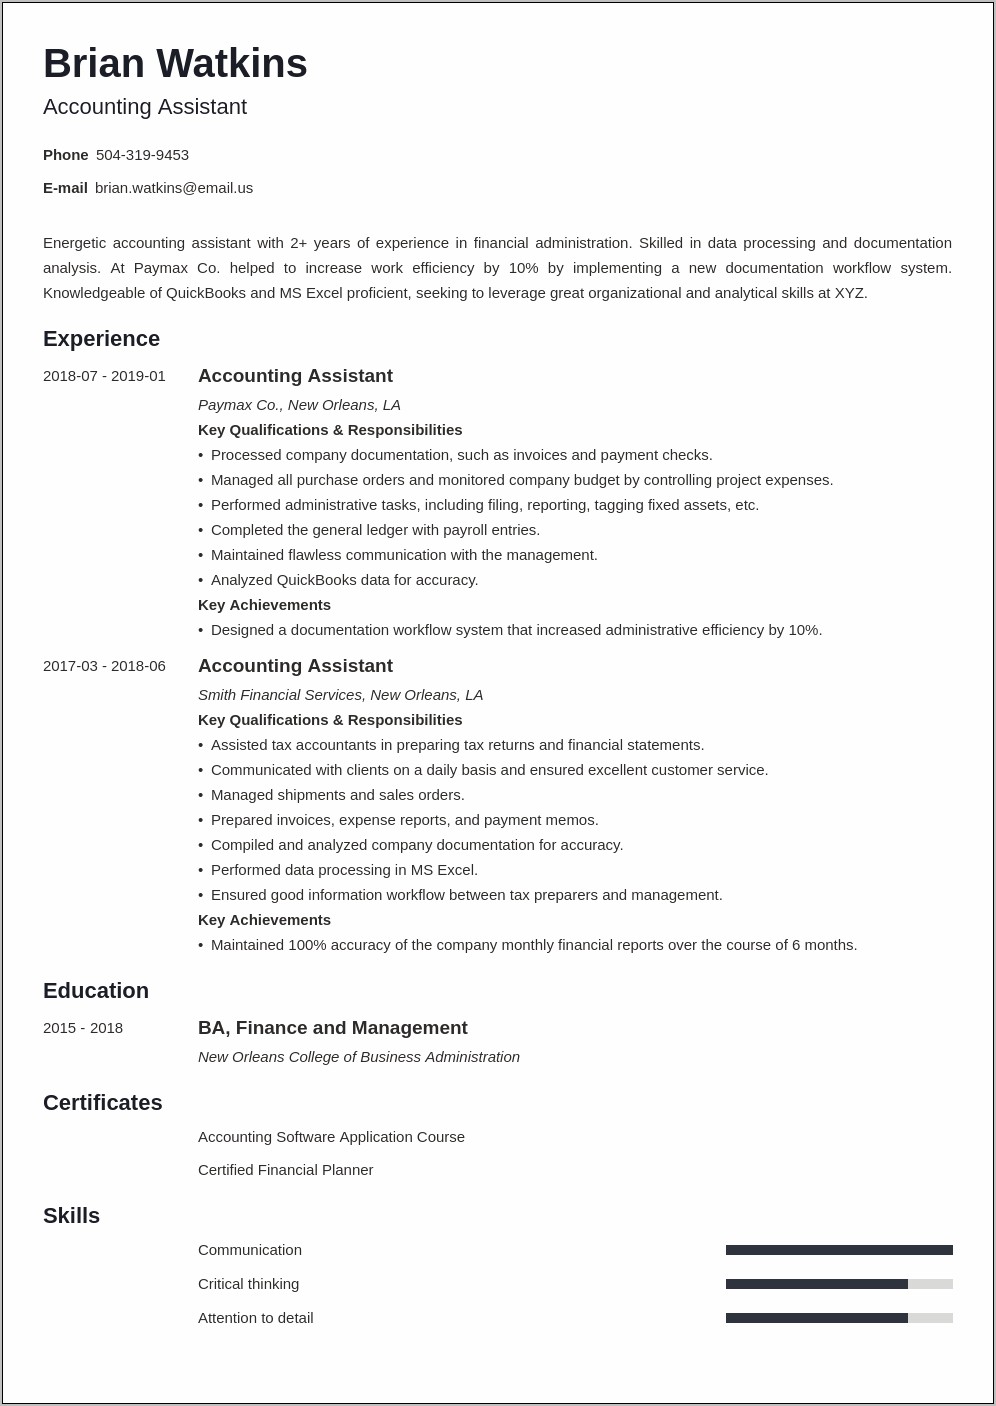 Resume Sample Of Accounting Assistant